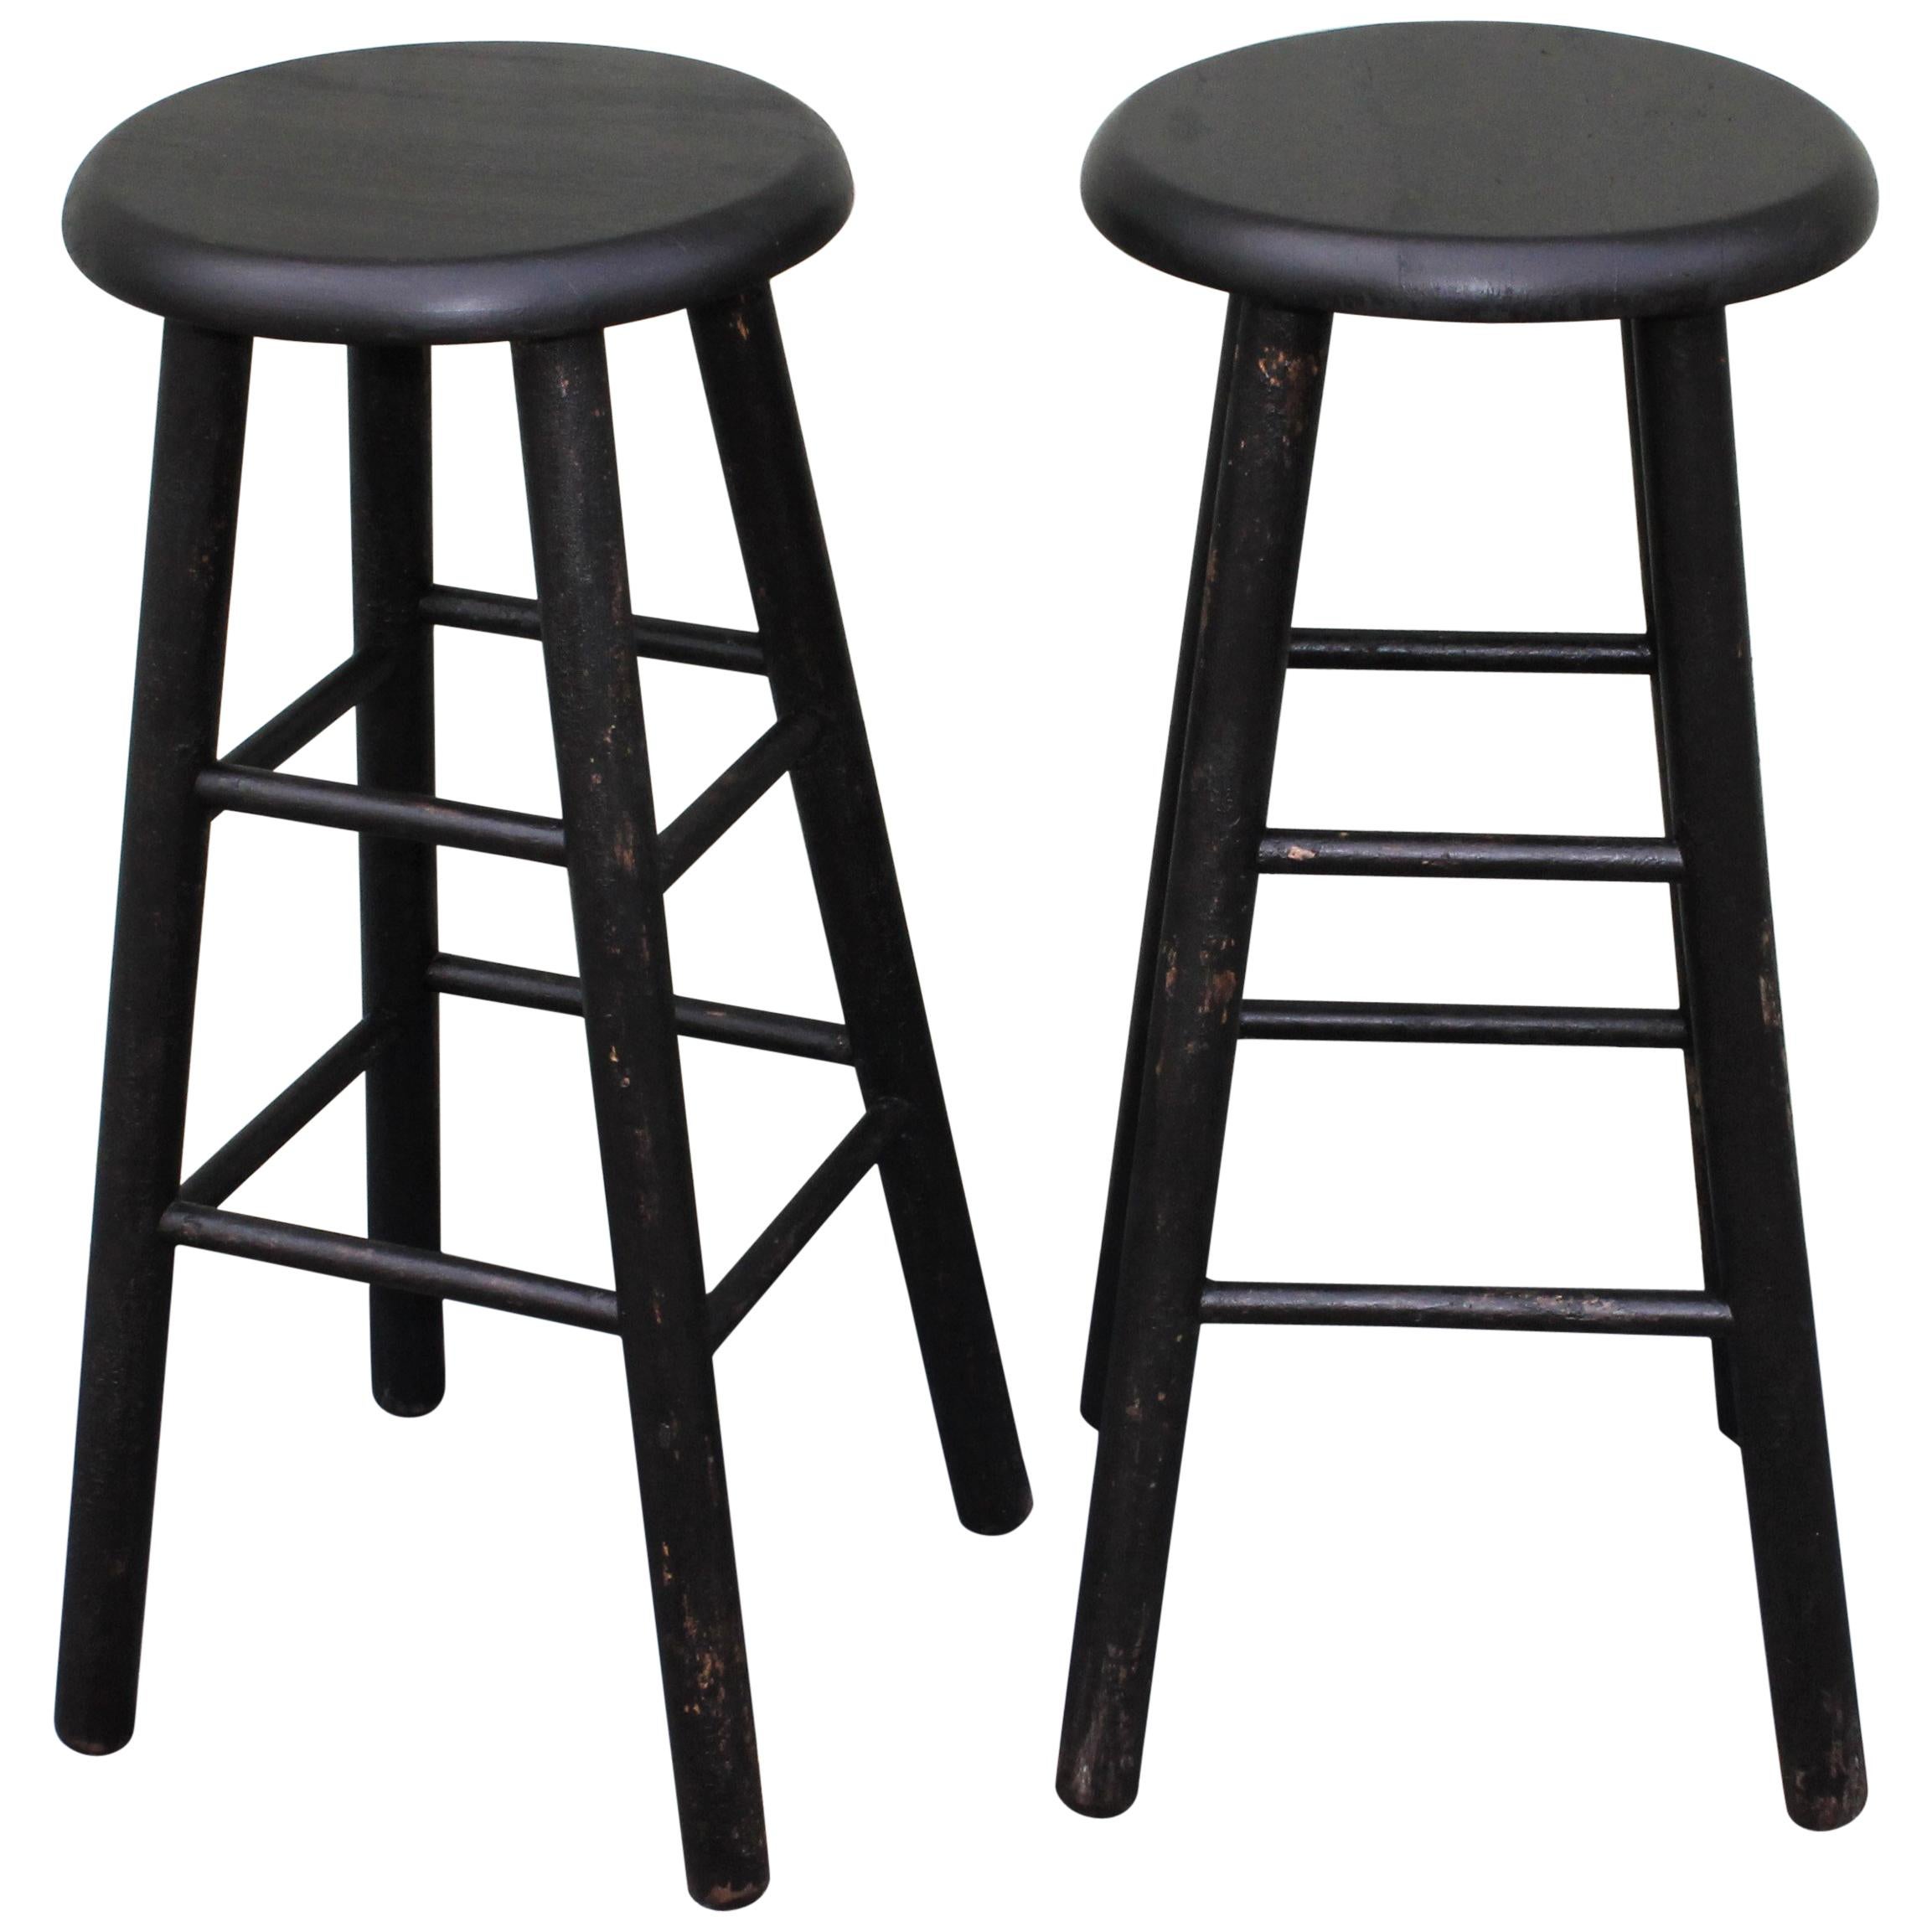 Bar Stools Midcentury in Black Painted Surface